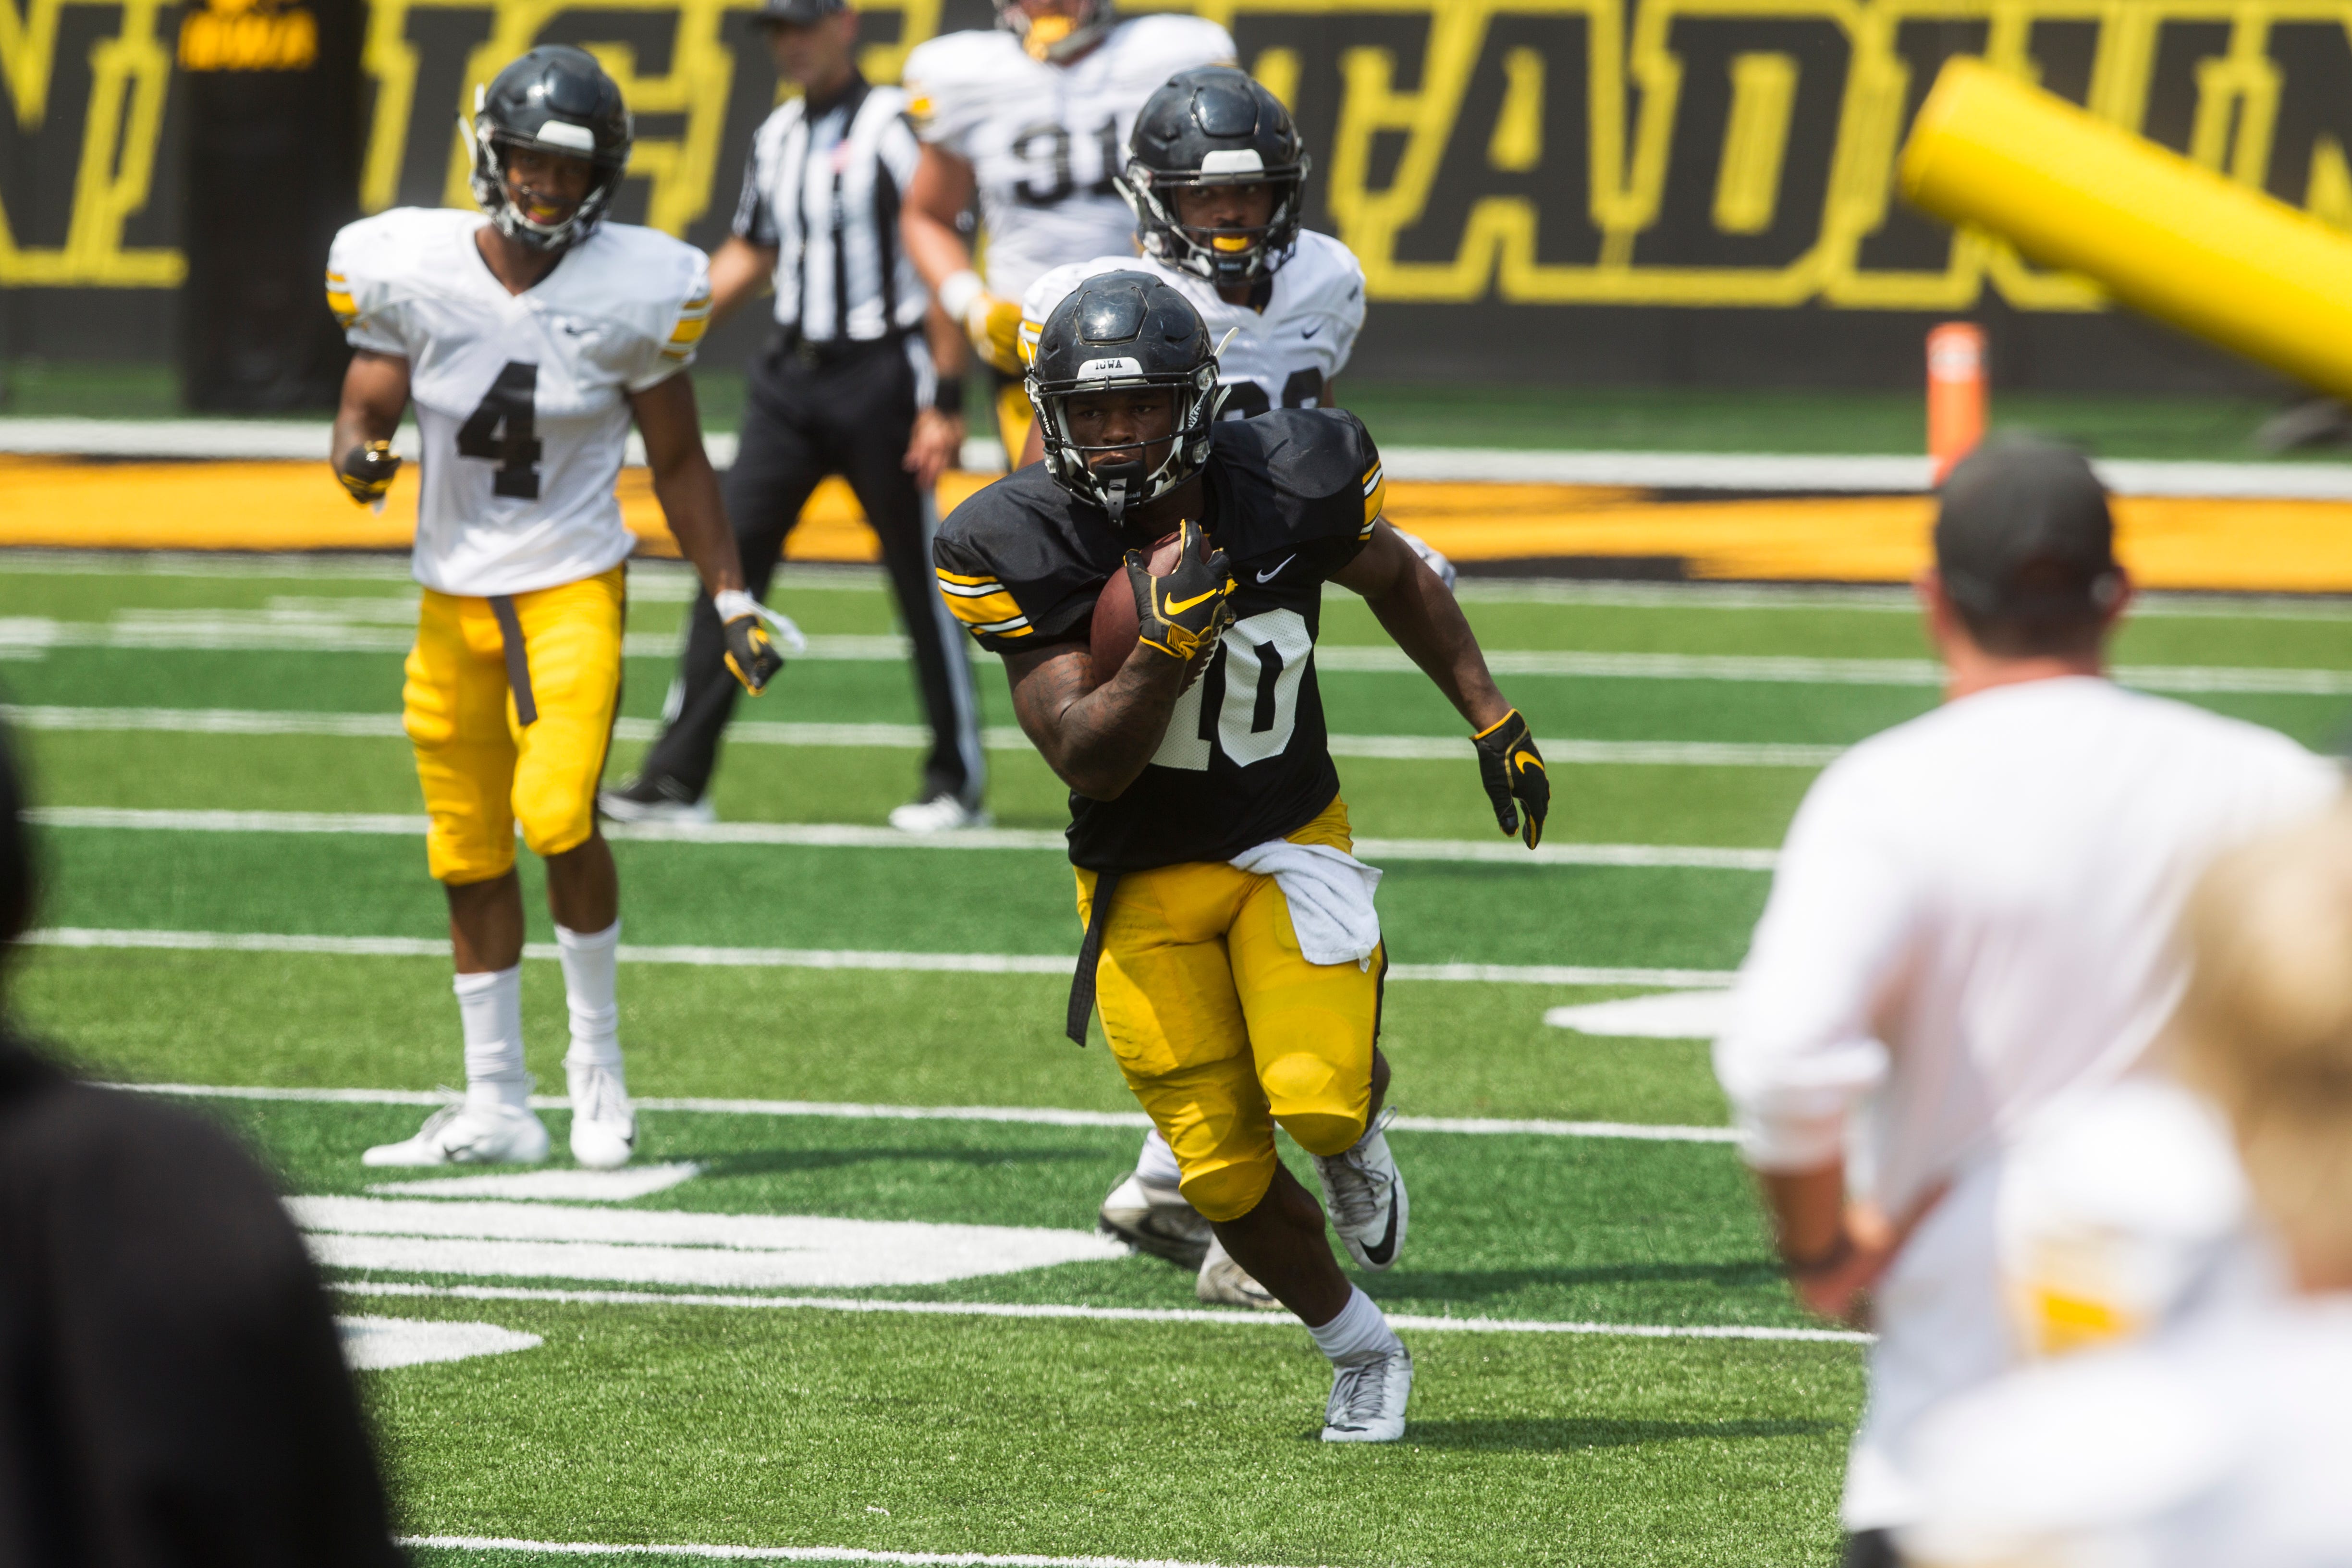 Iowa running back Mekhi Sargent rushes during a Kids Day practice on Saturday, Aug. 11, 2018, at Kinnick Stadium in Iowa City.